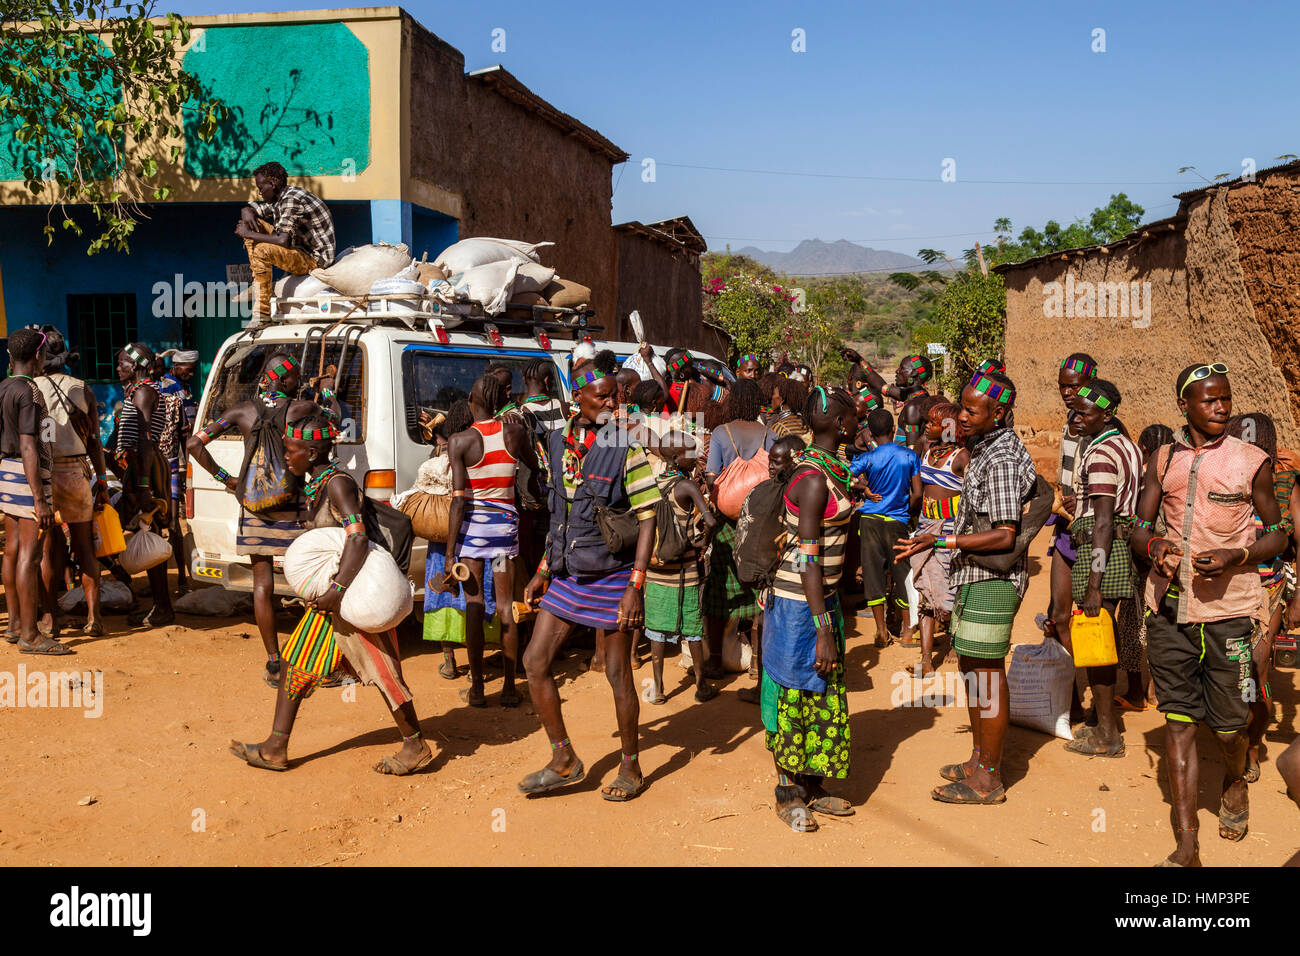 Young Hamer Tribespeople Looking For Transport Back To Their Villages From The Dimeka Saturday Market, Dimeka, Omo Valley, Ethiopia Stock Photo